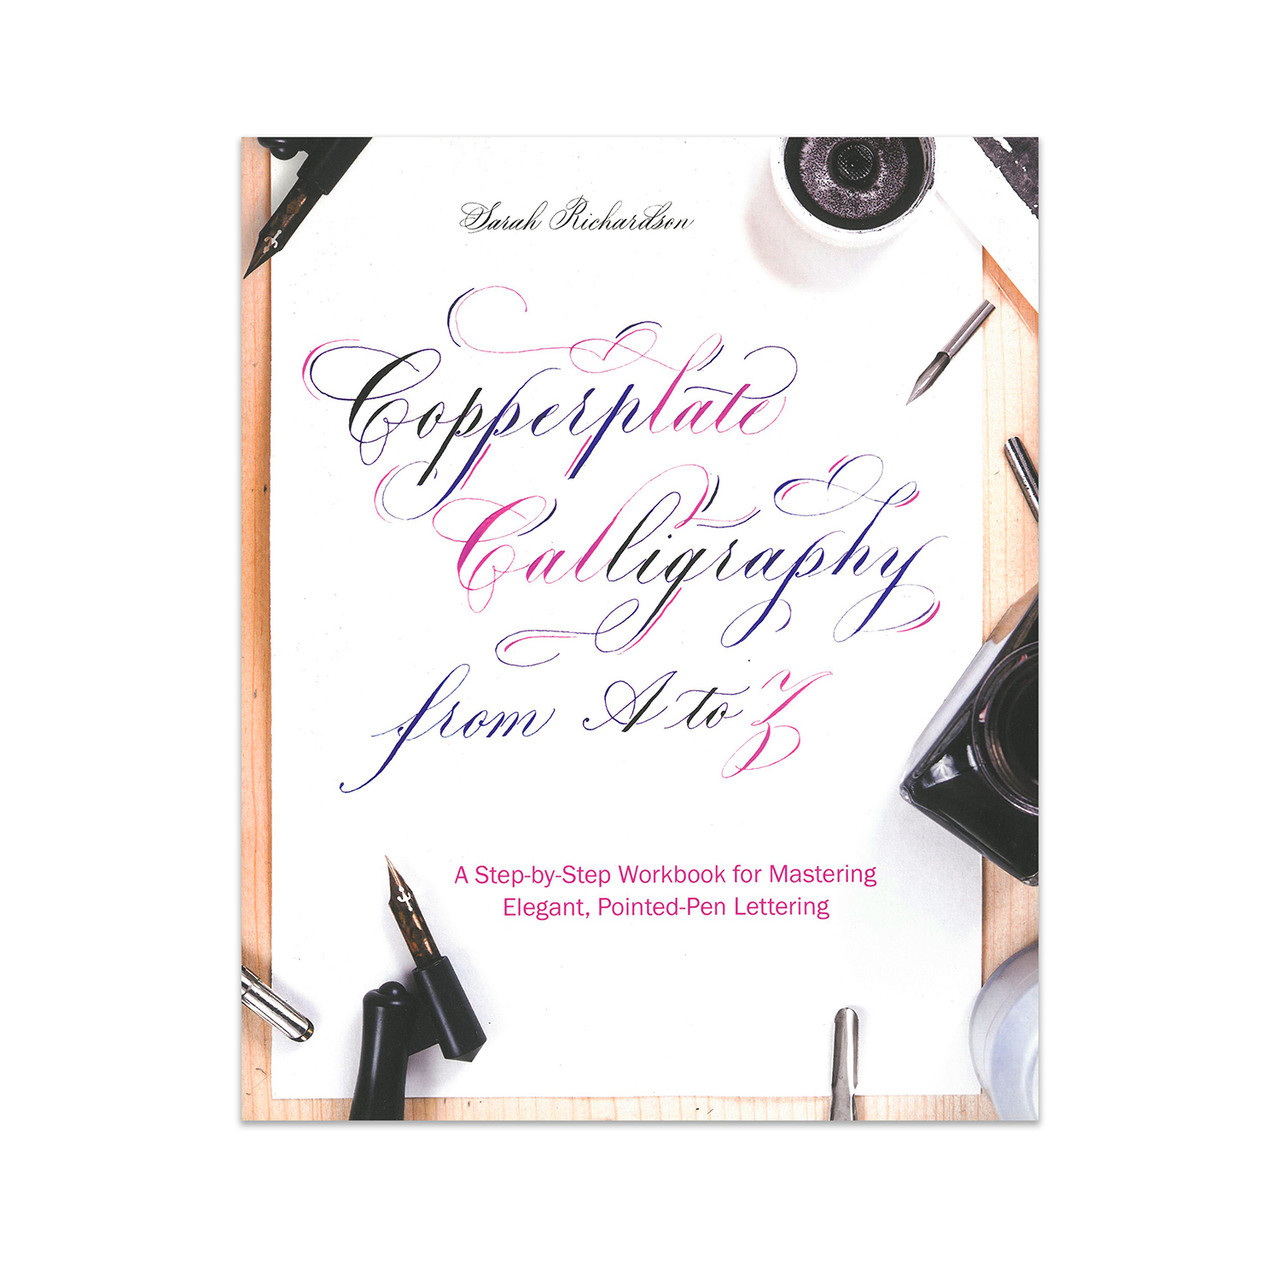 Classic Calligraphy for Beginners by Younghae Chung